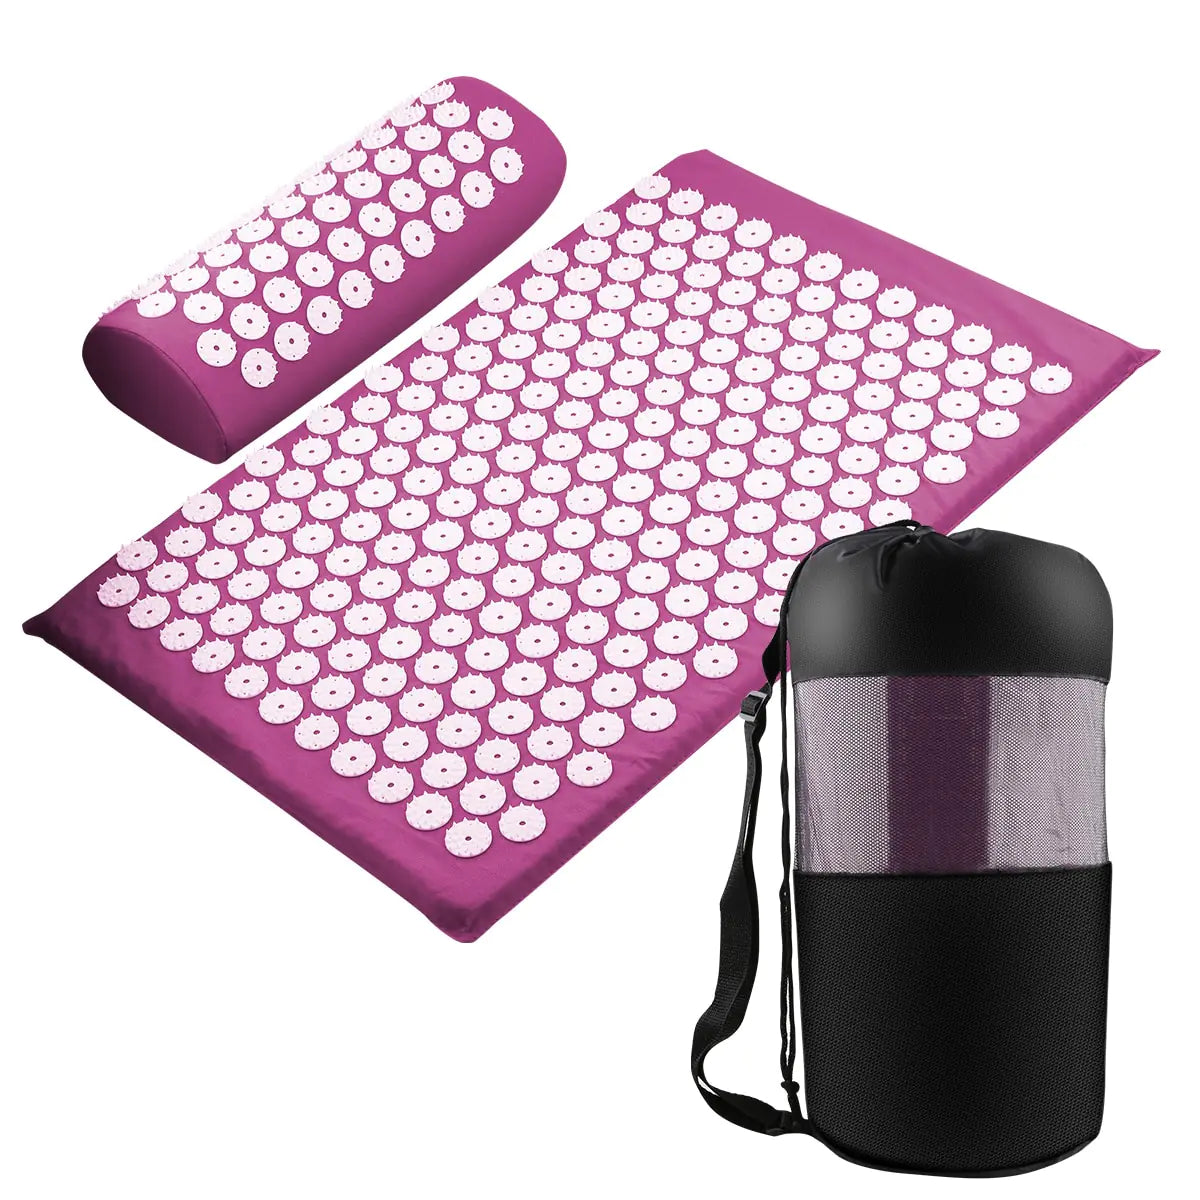 "Relax and rejuvenate with our Acupressure Massage Mat."